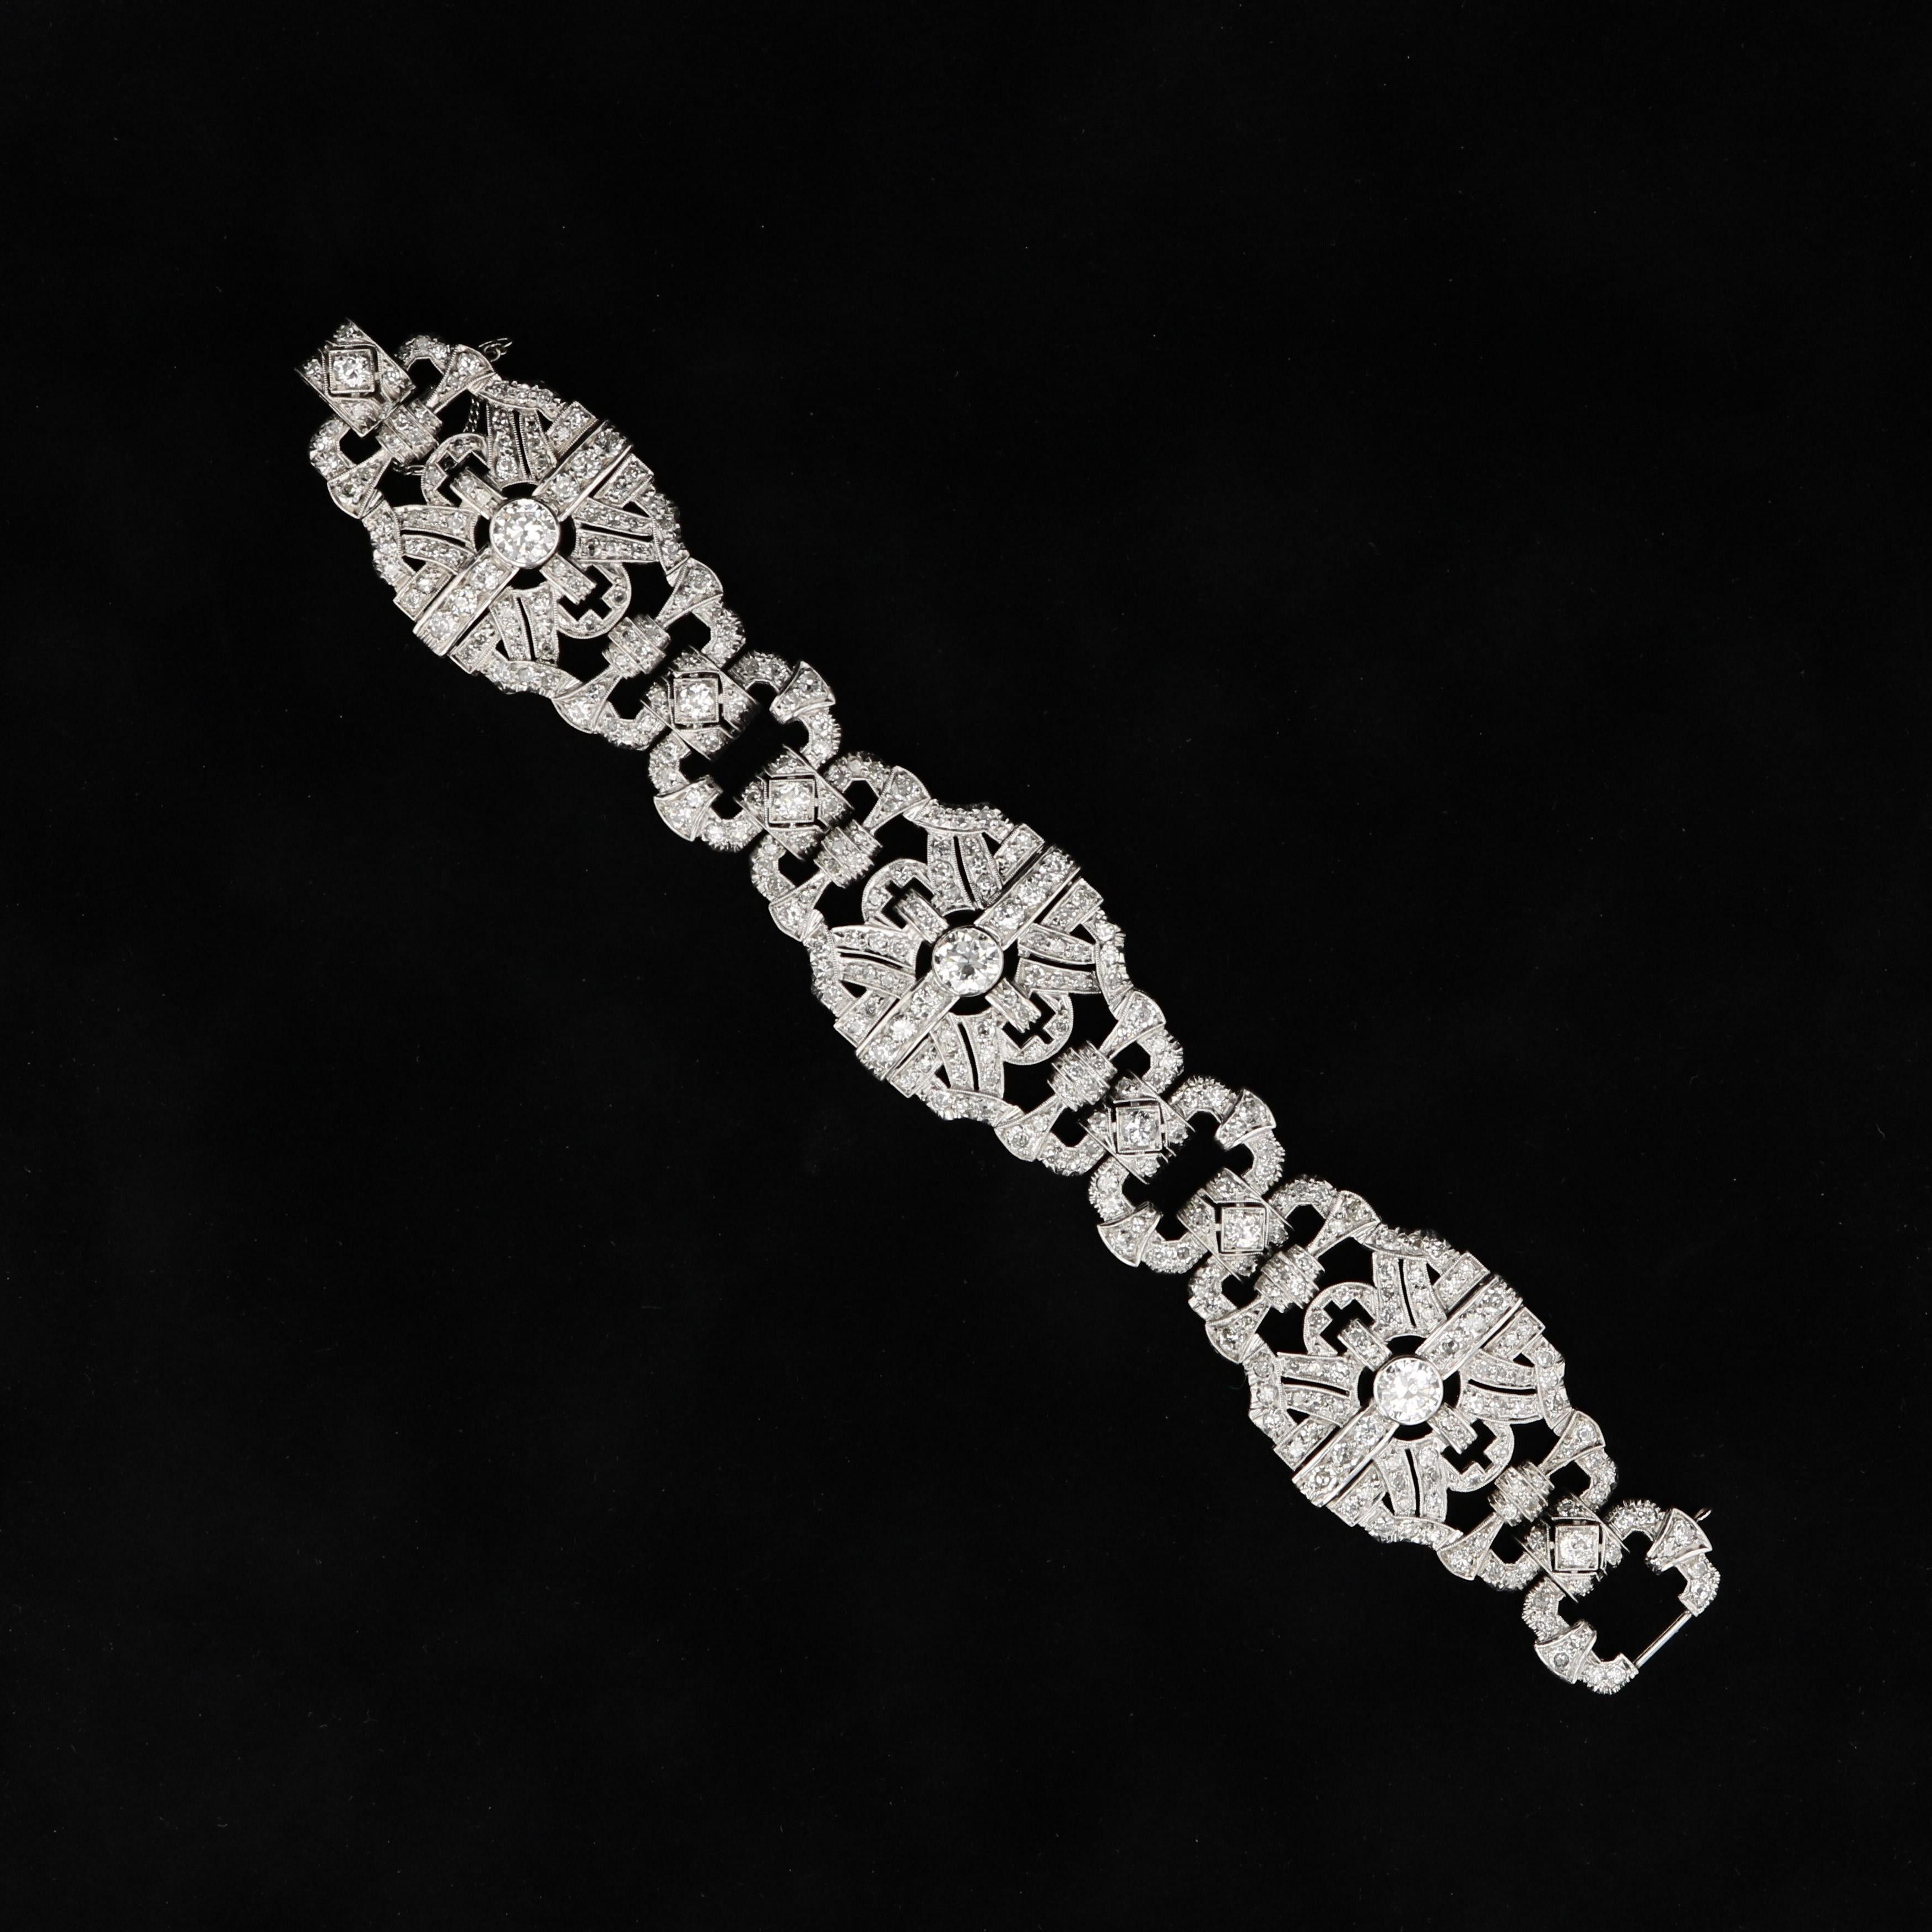 This antique platinum and diamond bracelet features approximately 12.00 carats of bright white round diamonds. The elaborate design of open arches and bows is cast in platinum with fine millegrain detailing.  The integrated clasp all but disappears